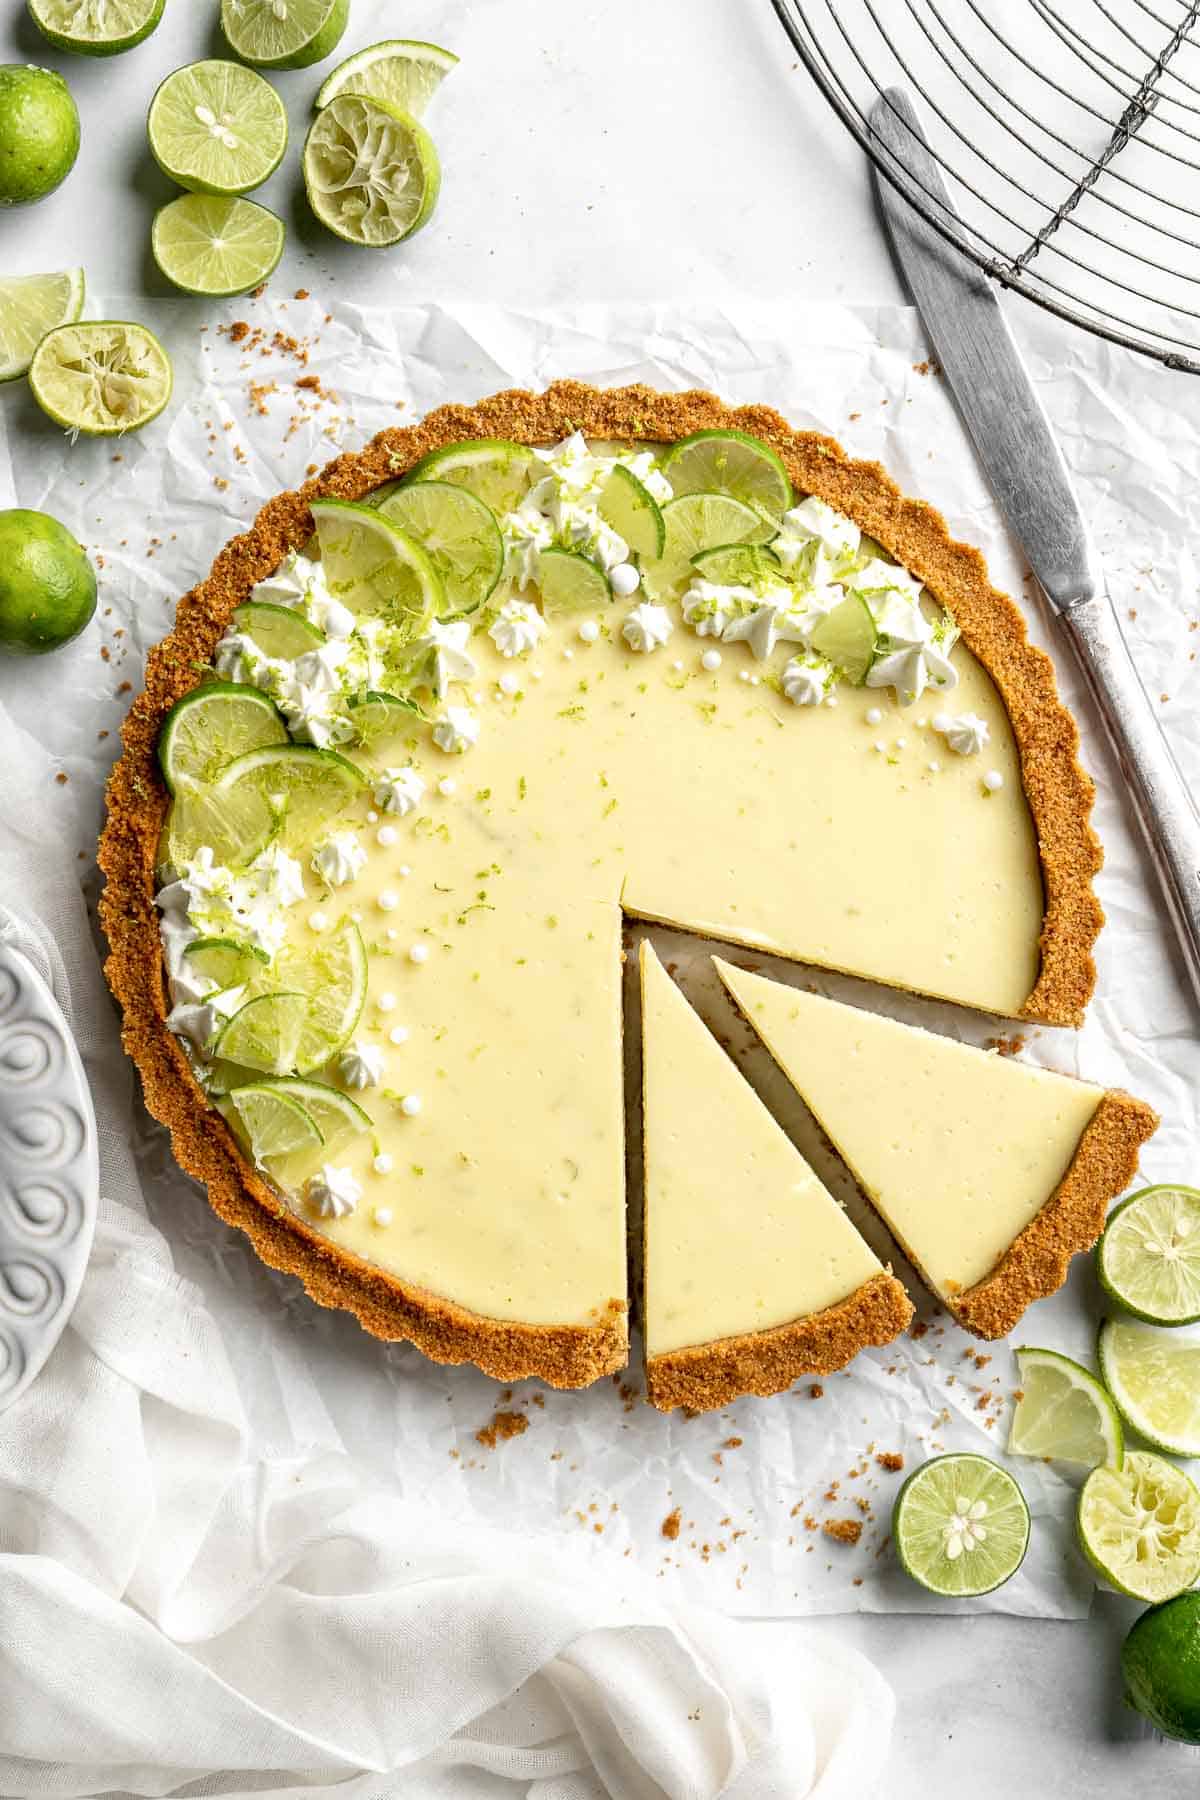 Perfectly creamy and tart with a buttery graham cracker crust, this easy Key Lime Pie is a classic for a reason. You won't need another pie recipe again! | aheadofthyme.com